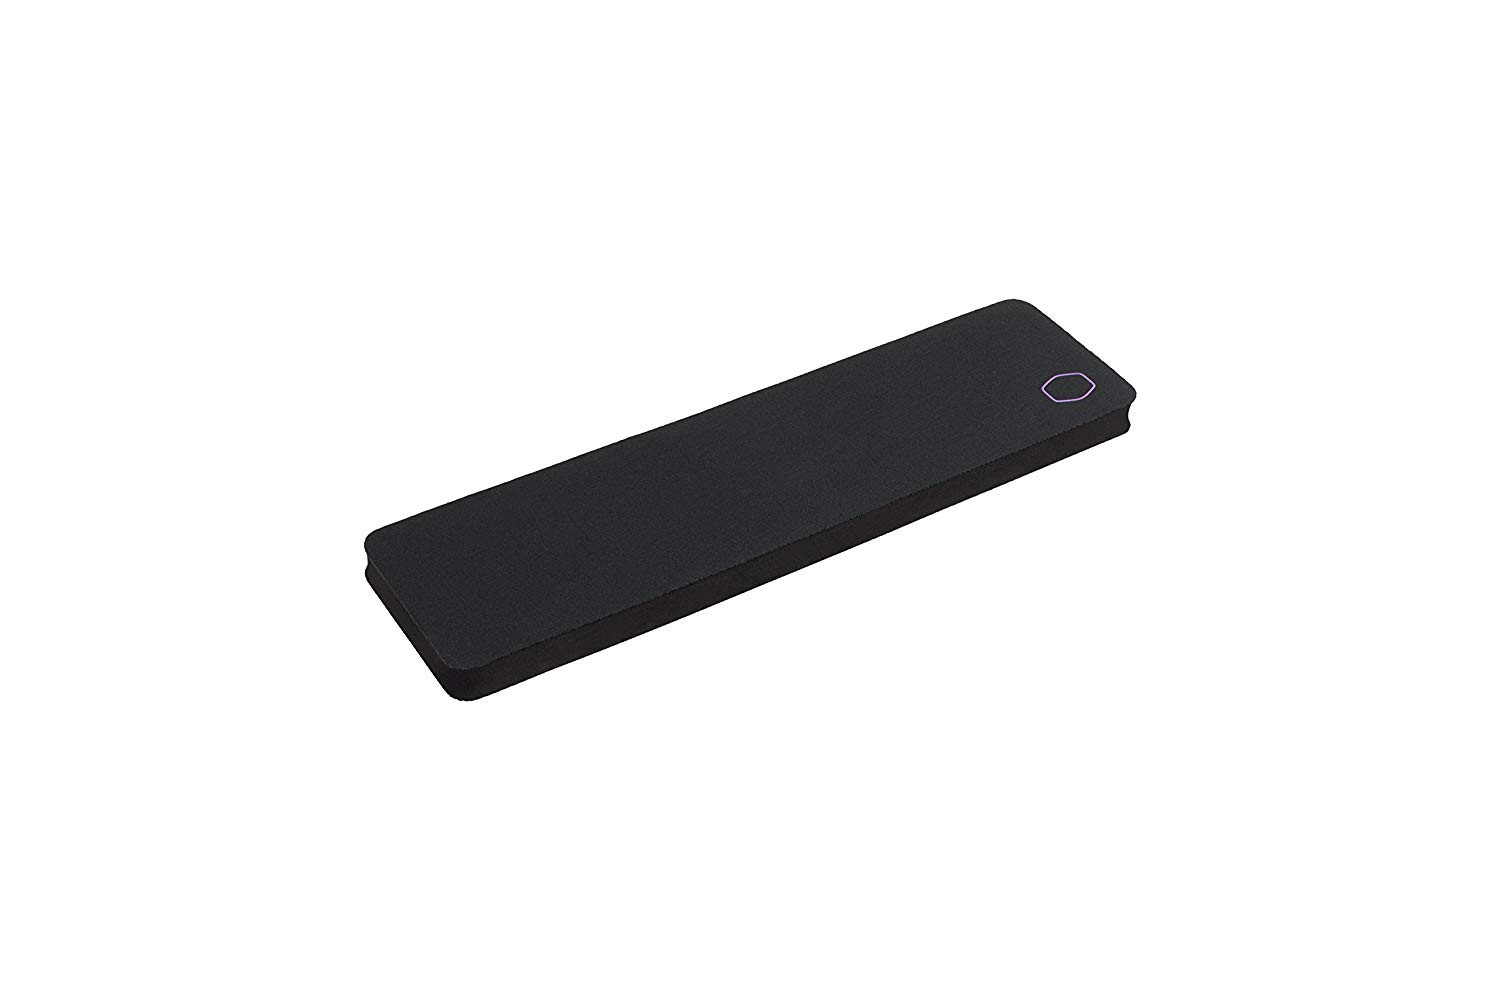 COOLER MASTER MASTERACCESSORY WR530 SIZE SMALL WRIST REST PAD FOR KEYBOARD